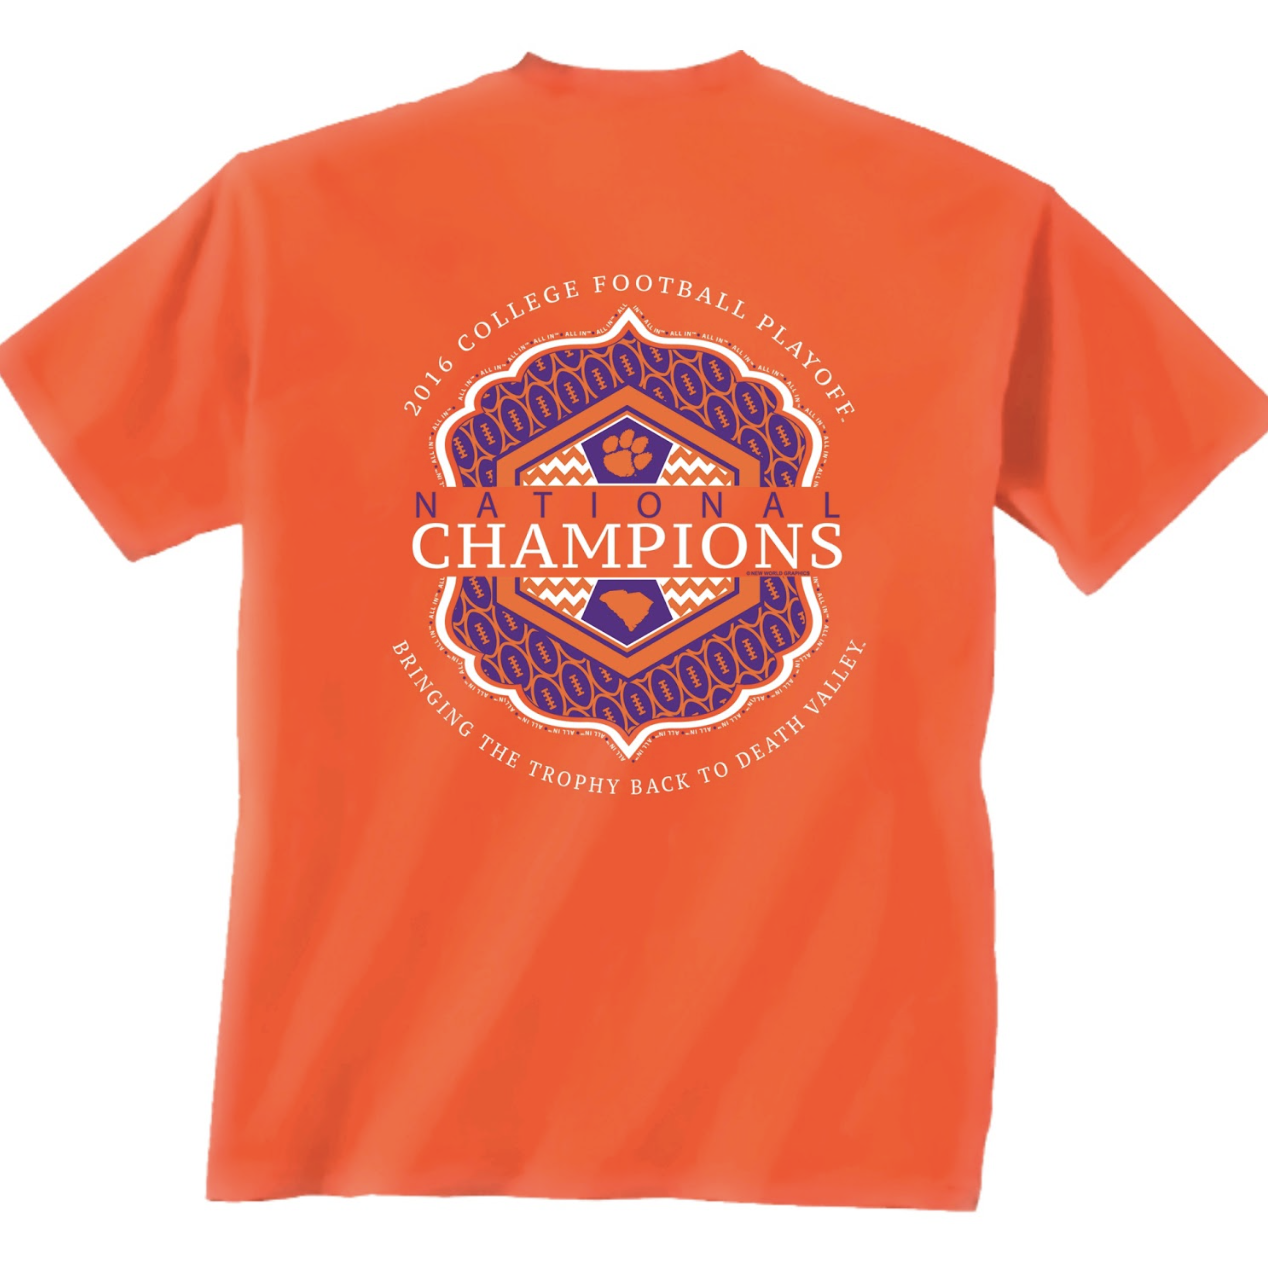 Clemson "Lady Tiger" National Champions